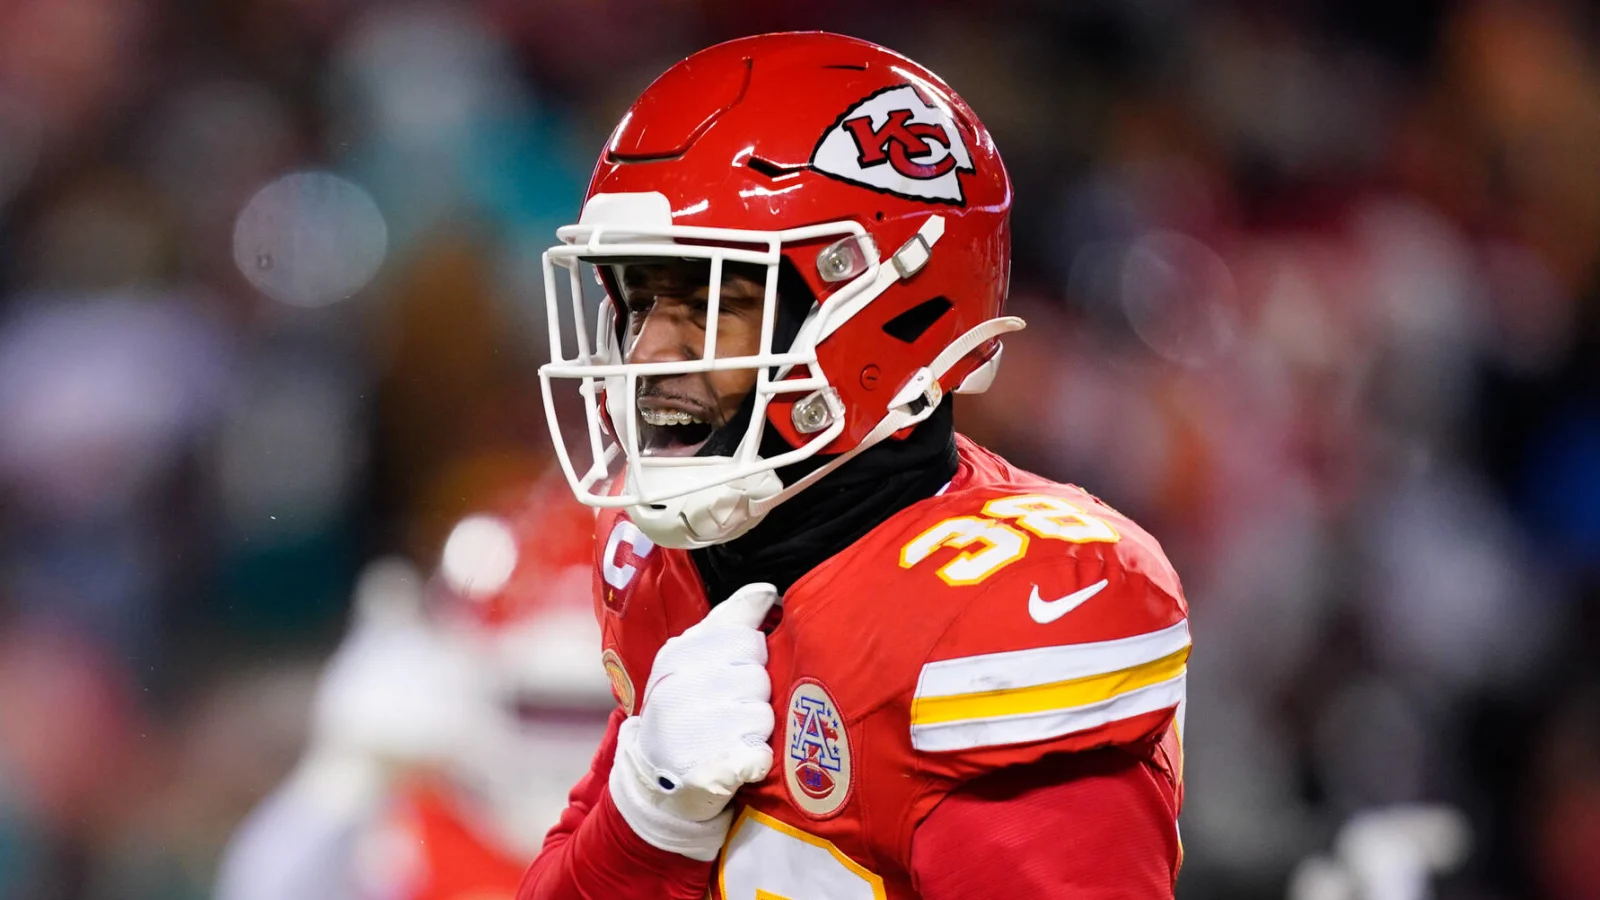 Chiefs Cornerback L'Jarius Sneed Could Stay Inside the Latest NFL Drama